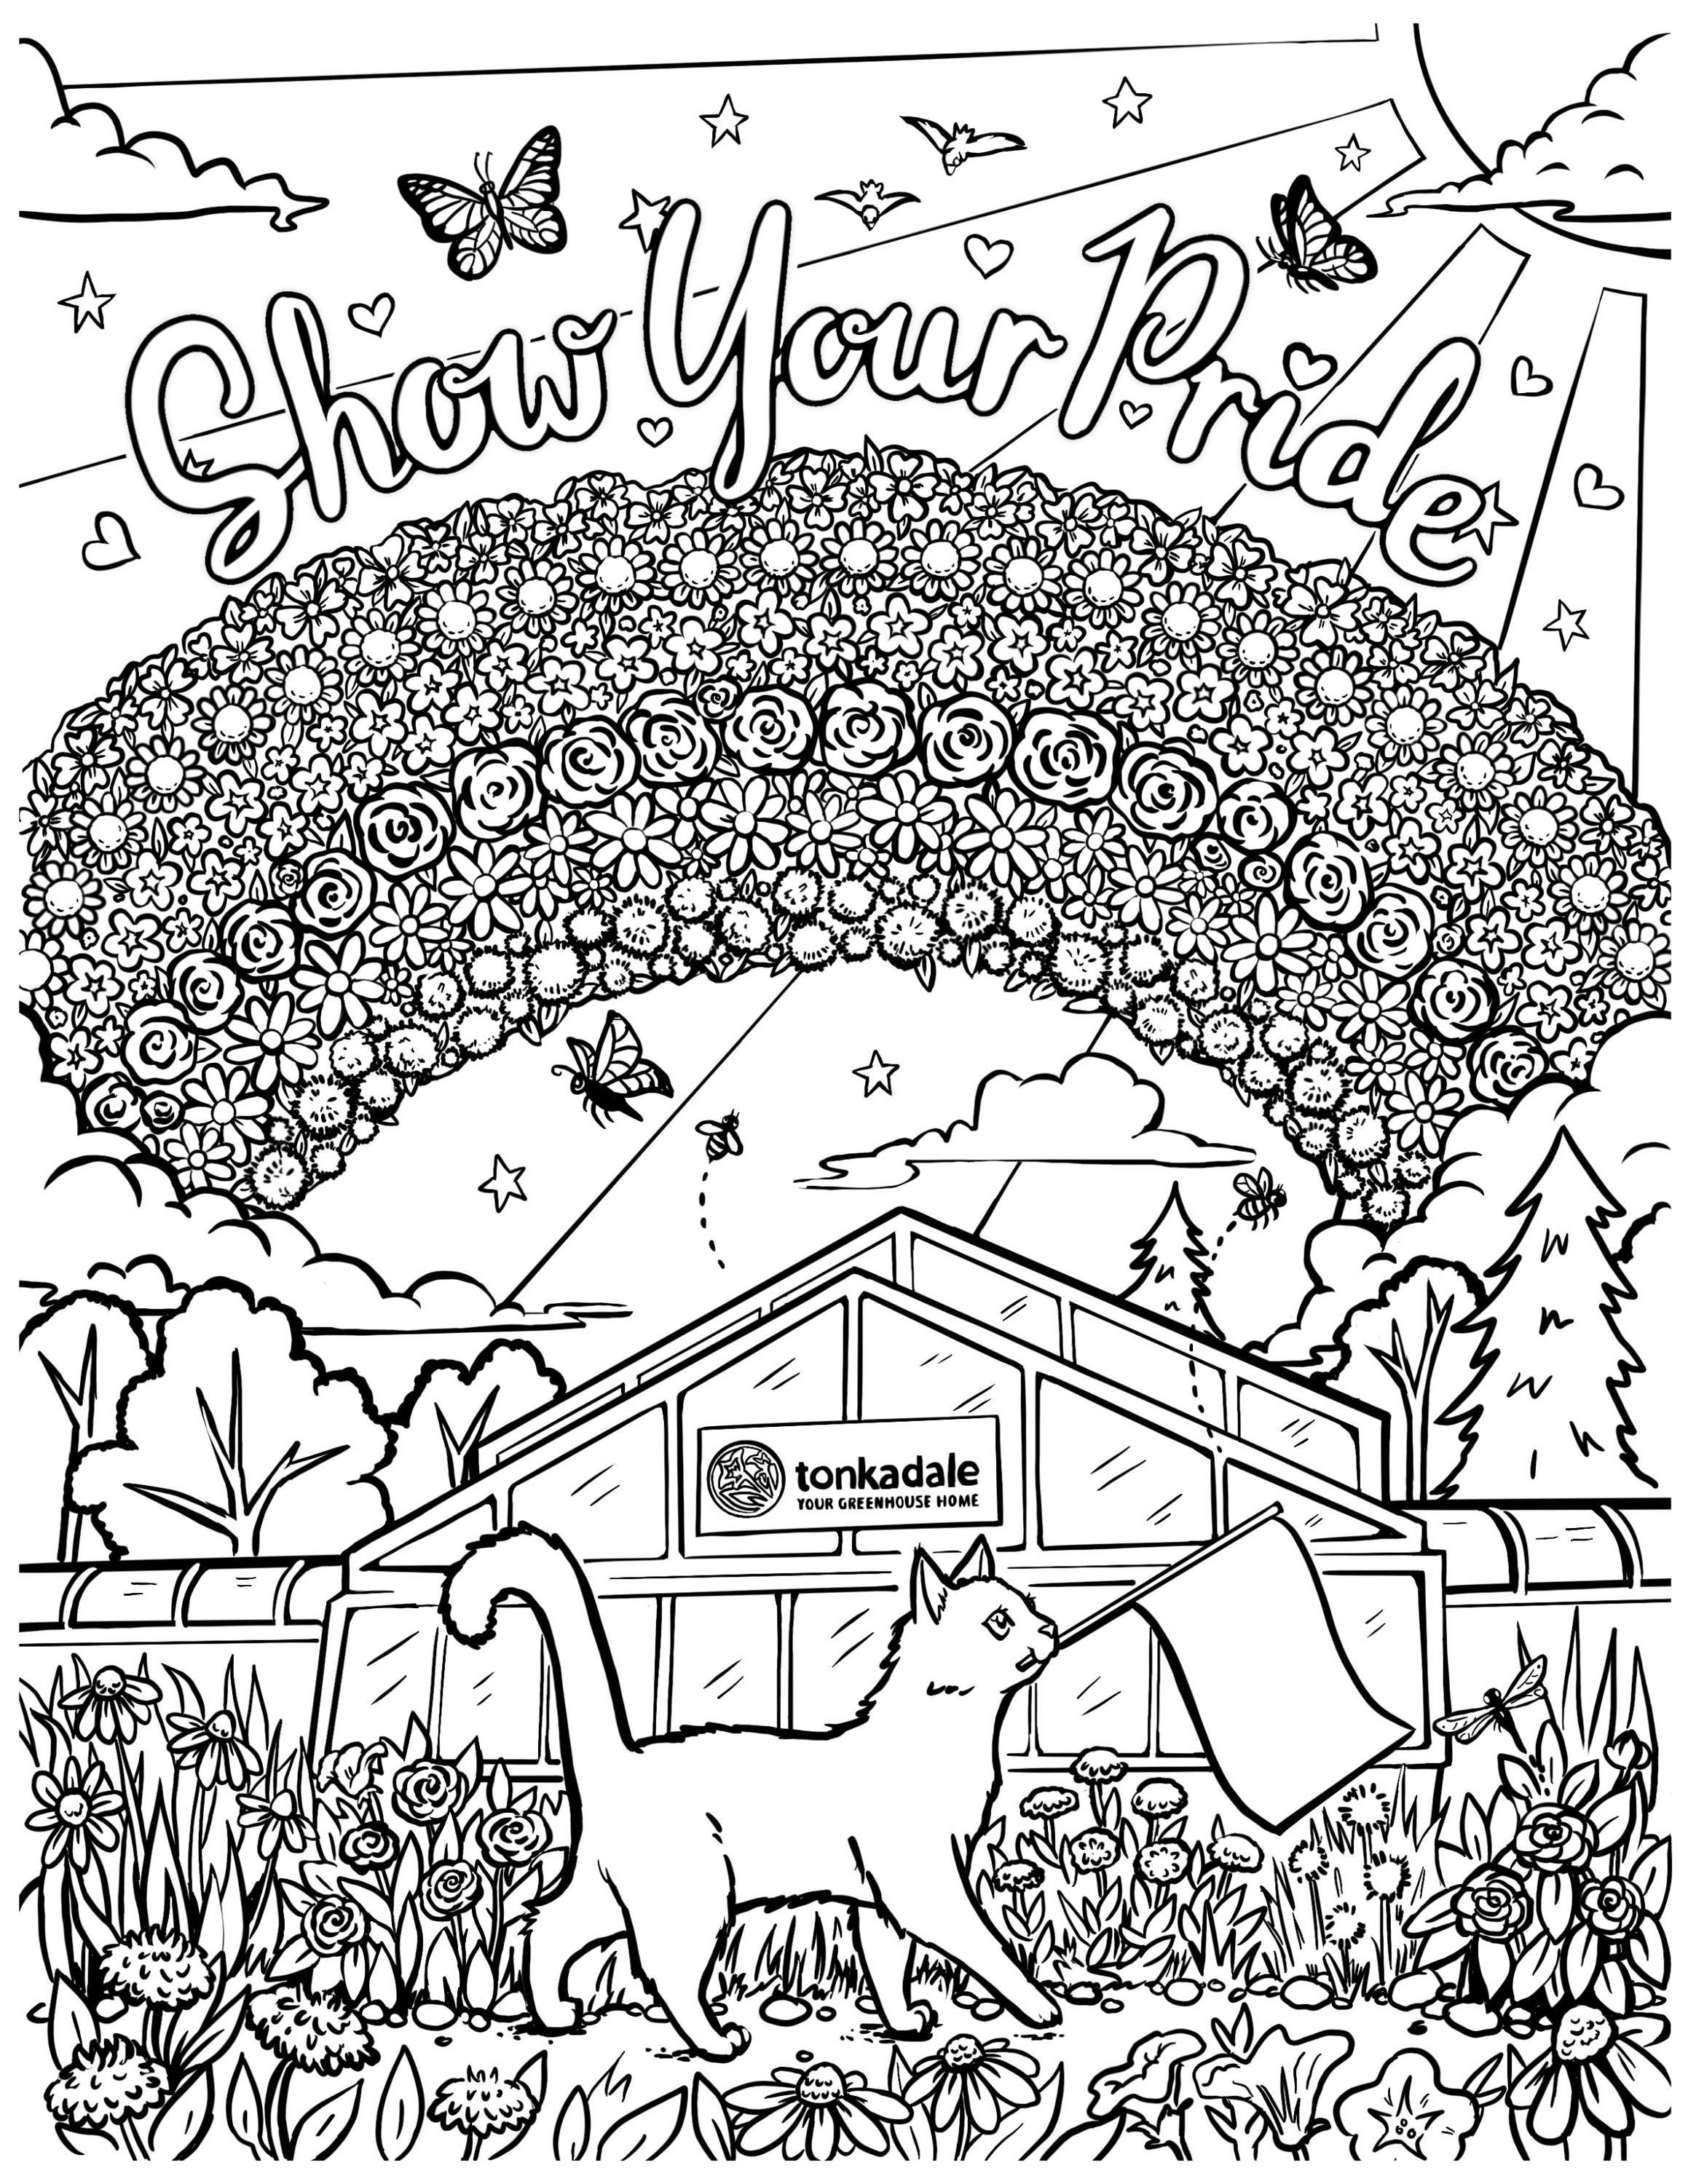 Show your pride coloring page